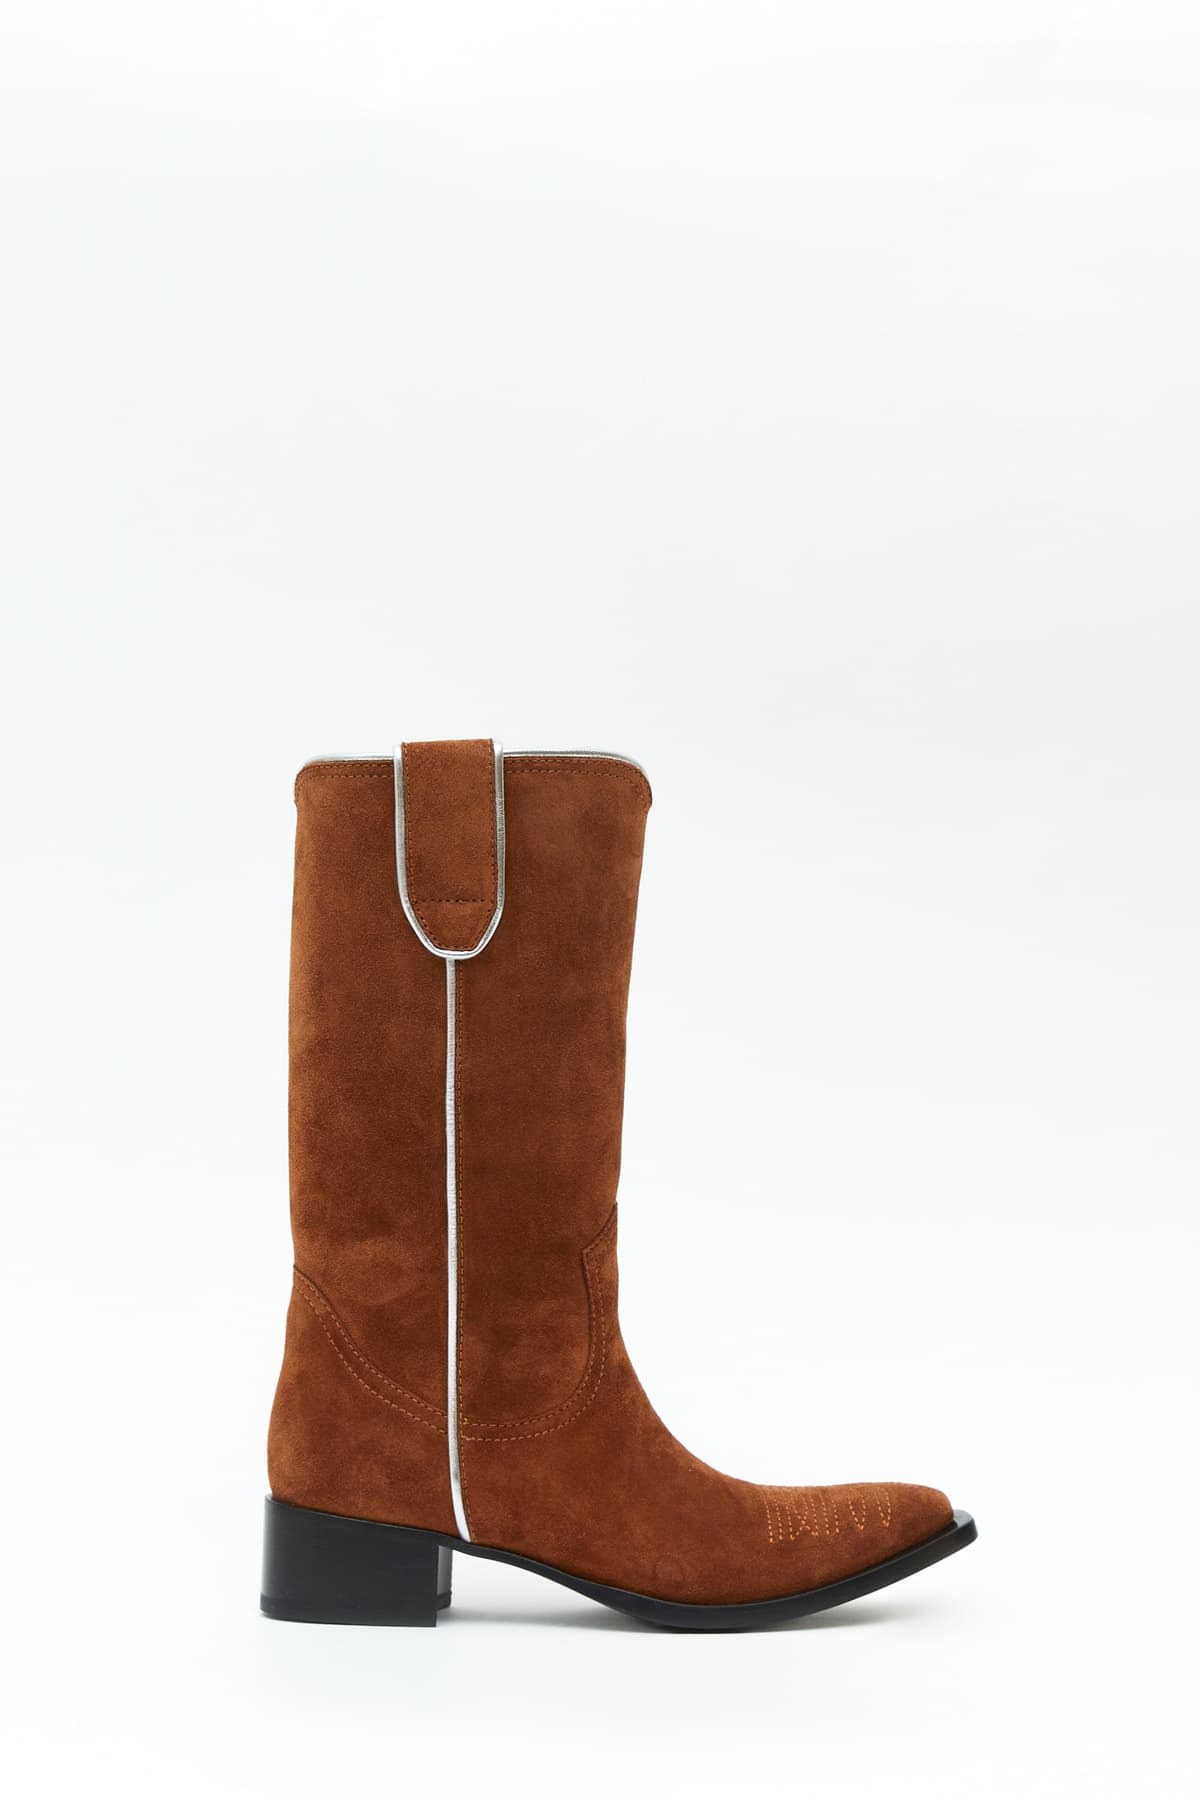 Sideview of Taxhoney boot in velour cognac from the Haus of Honey fall-winter 2023-24